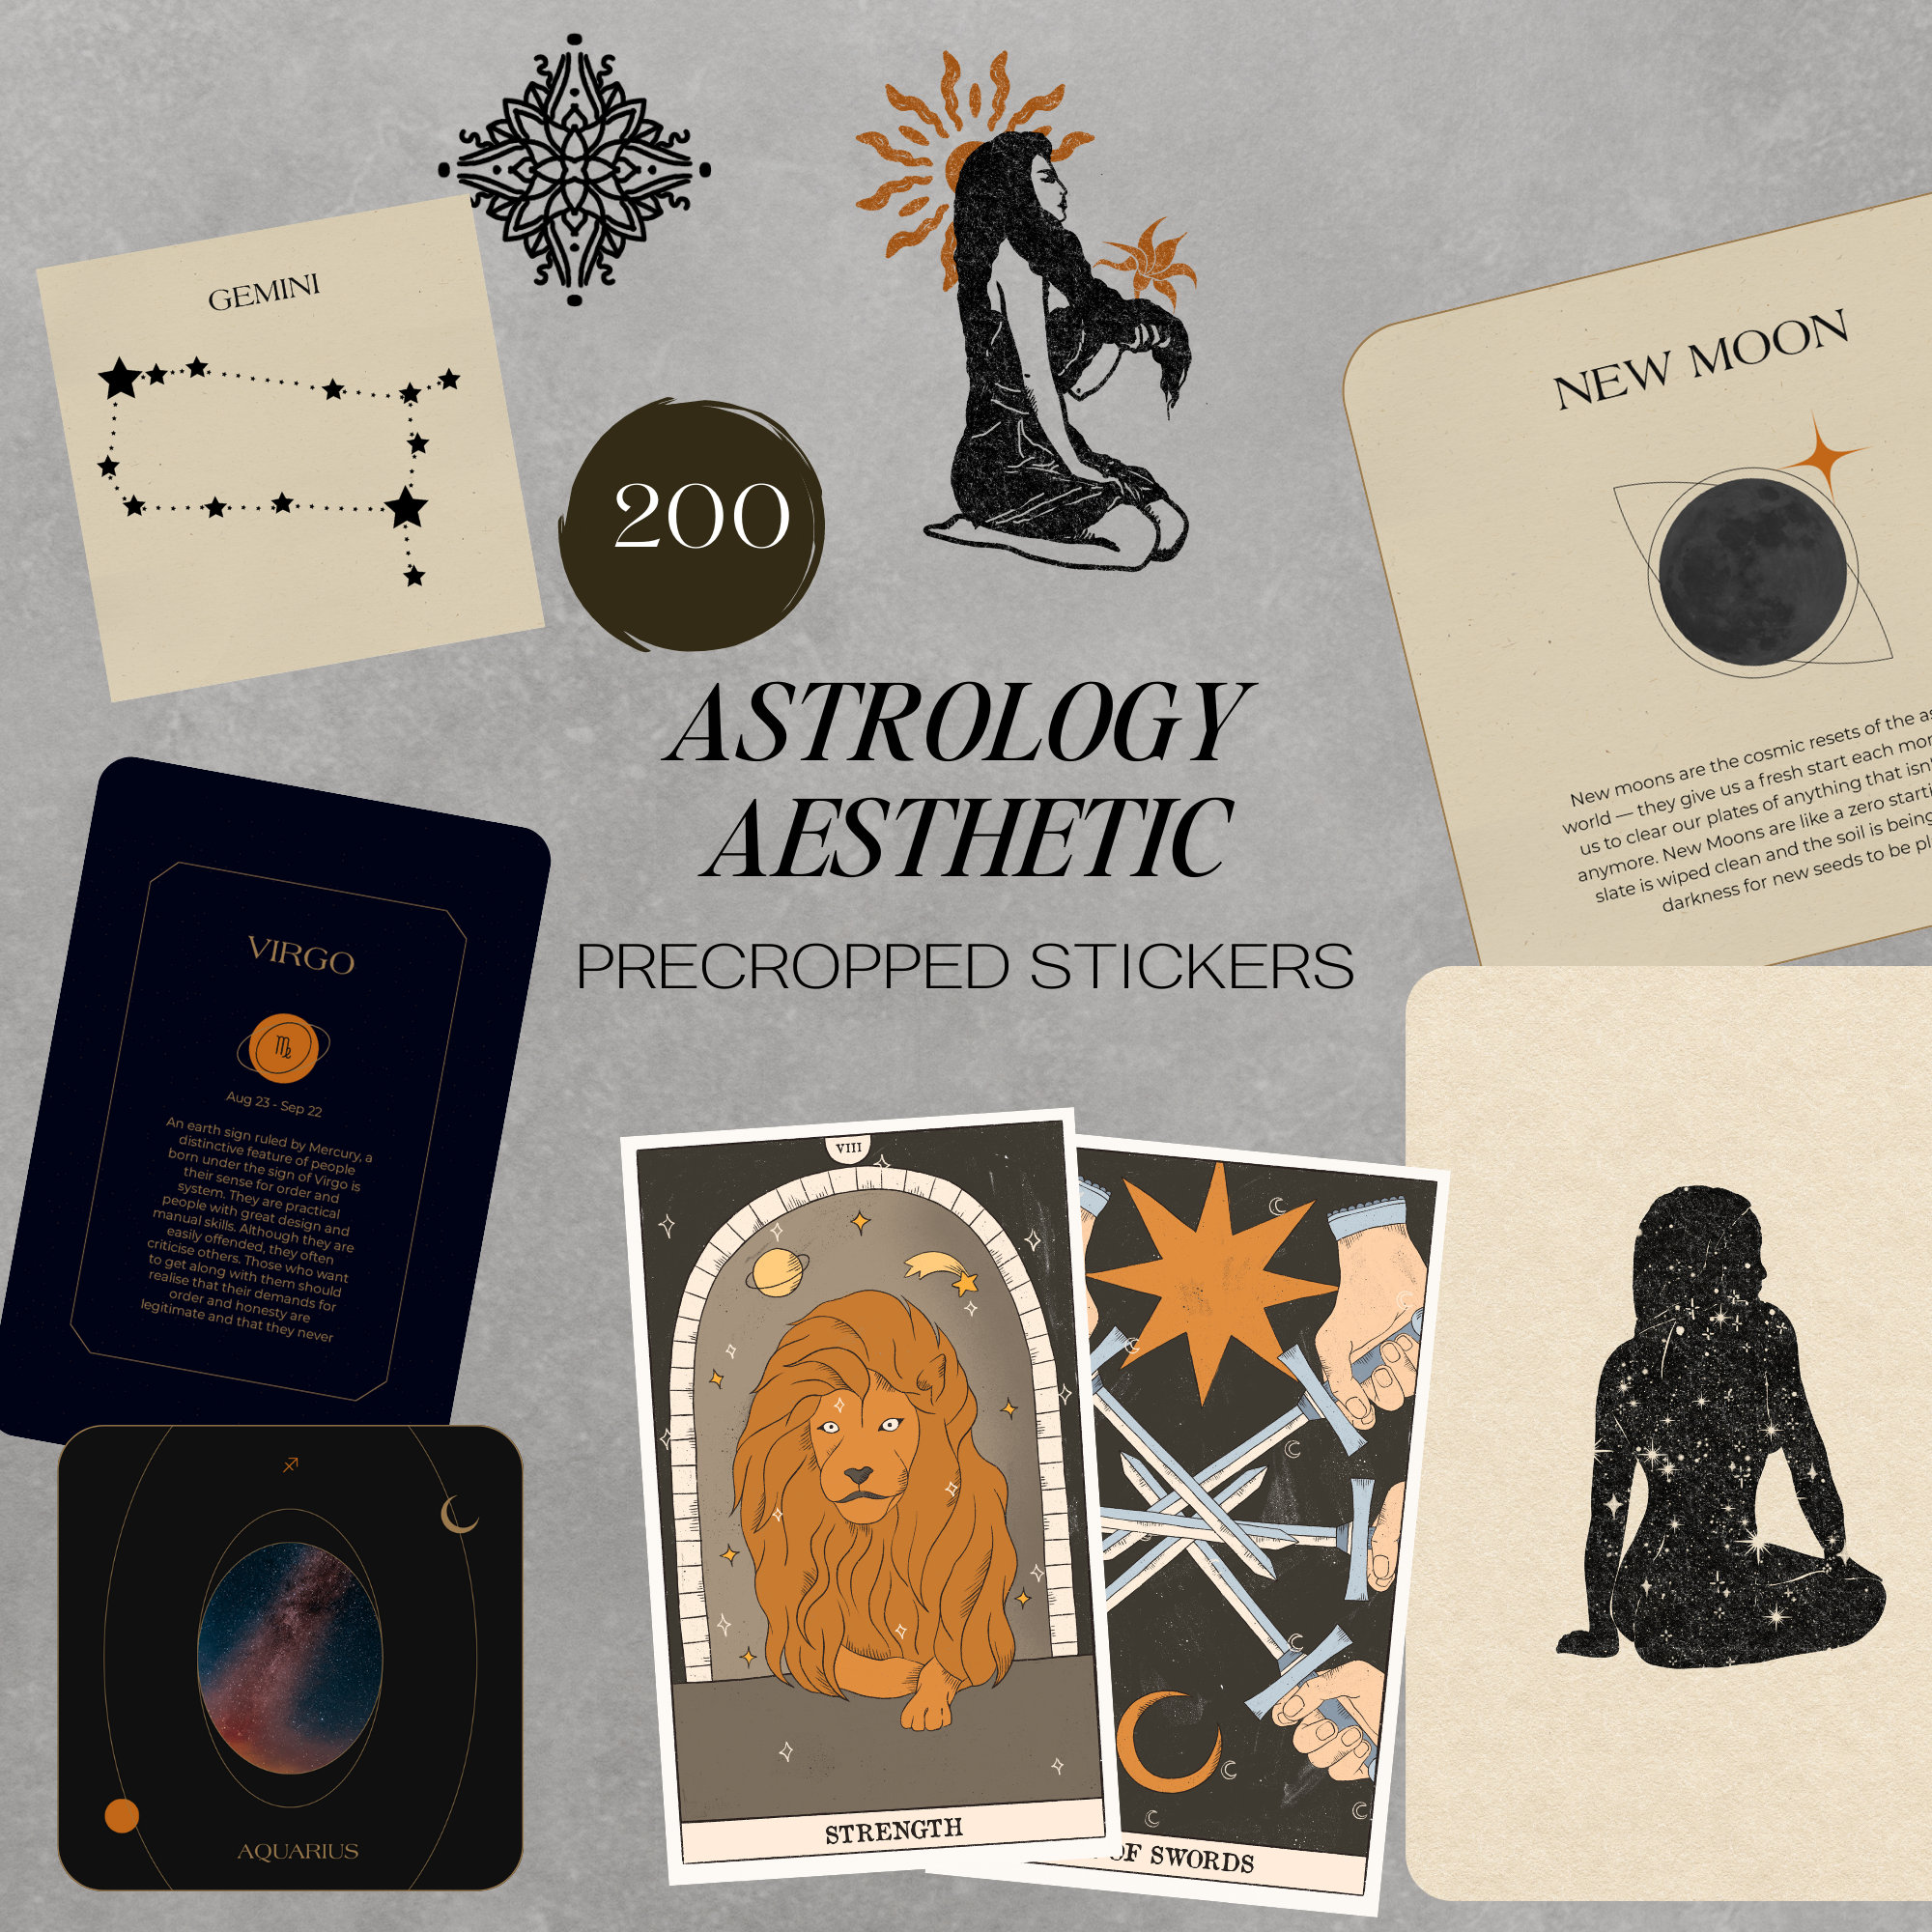 50 PCS Astrology Stickers,Zodiac Celestial Stickers for Water Bottles  Laptops Scrapbooks Skateboards Phone,Vintage Aesthetic Magic Stickers Gifts  for